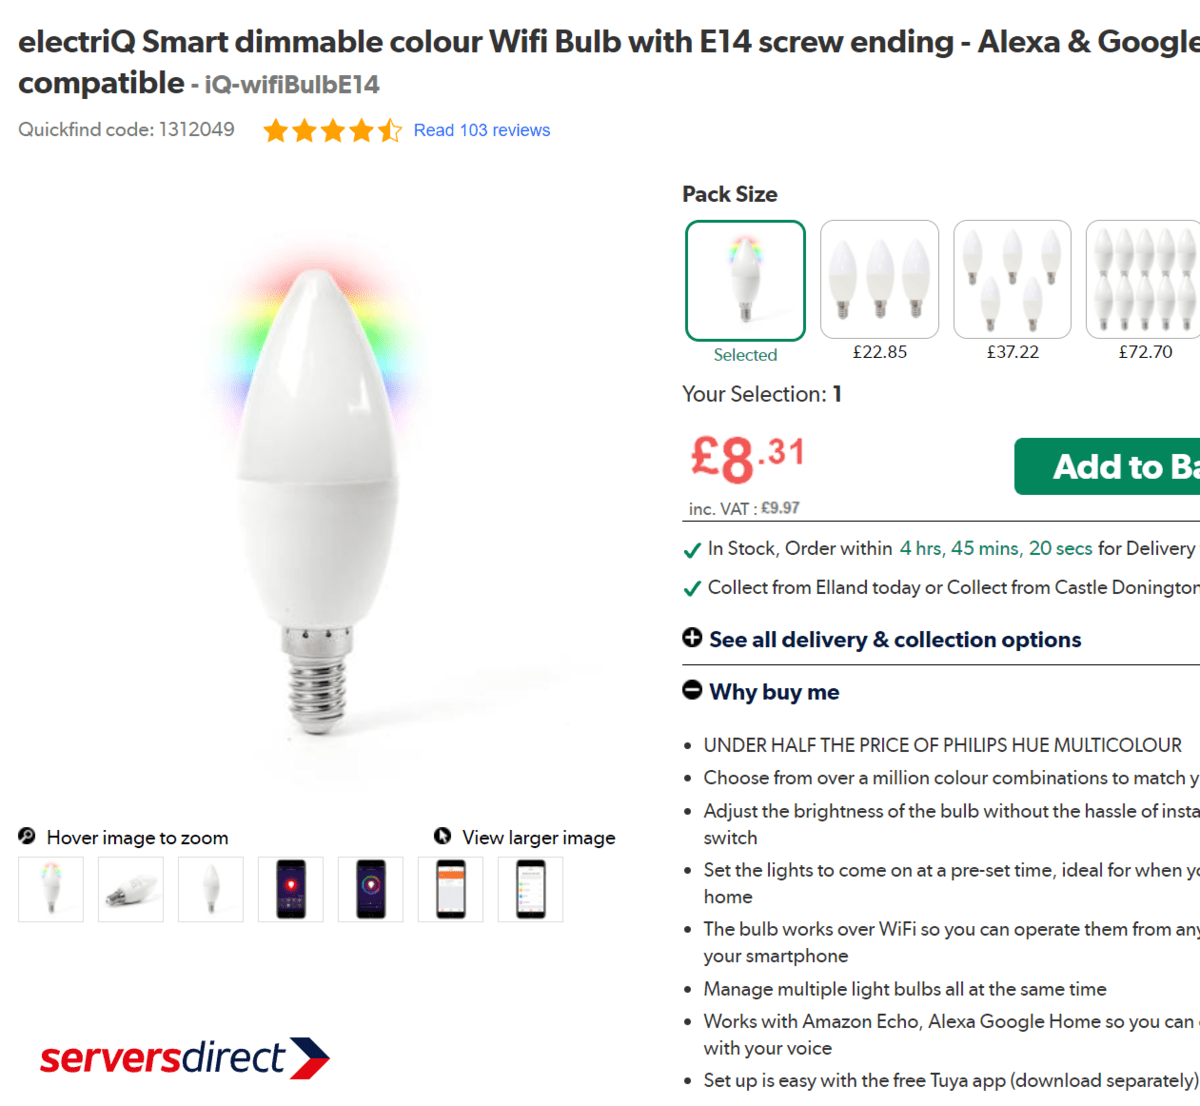 https://www.smarthomepoint.com/wp-content/uploads/2022/04/A-dual-band-smart-bulb-with-5-GHz-WiFi-support-sold-by-serversdirect-in-the-UK.png